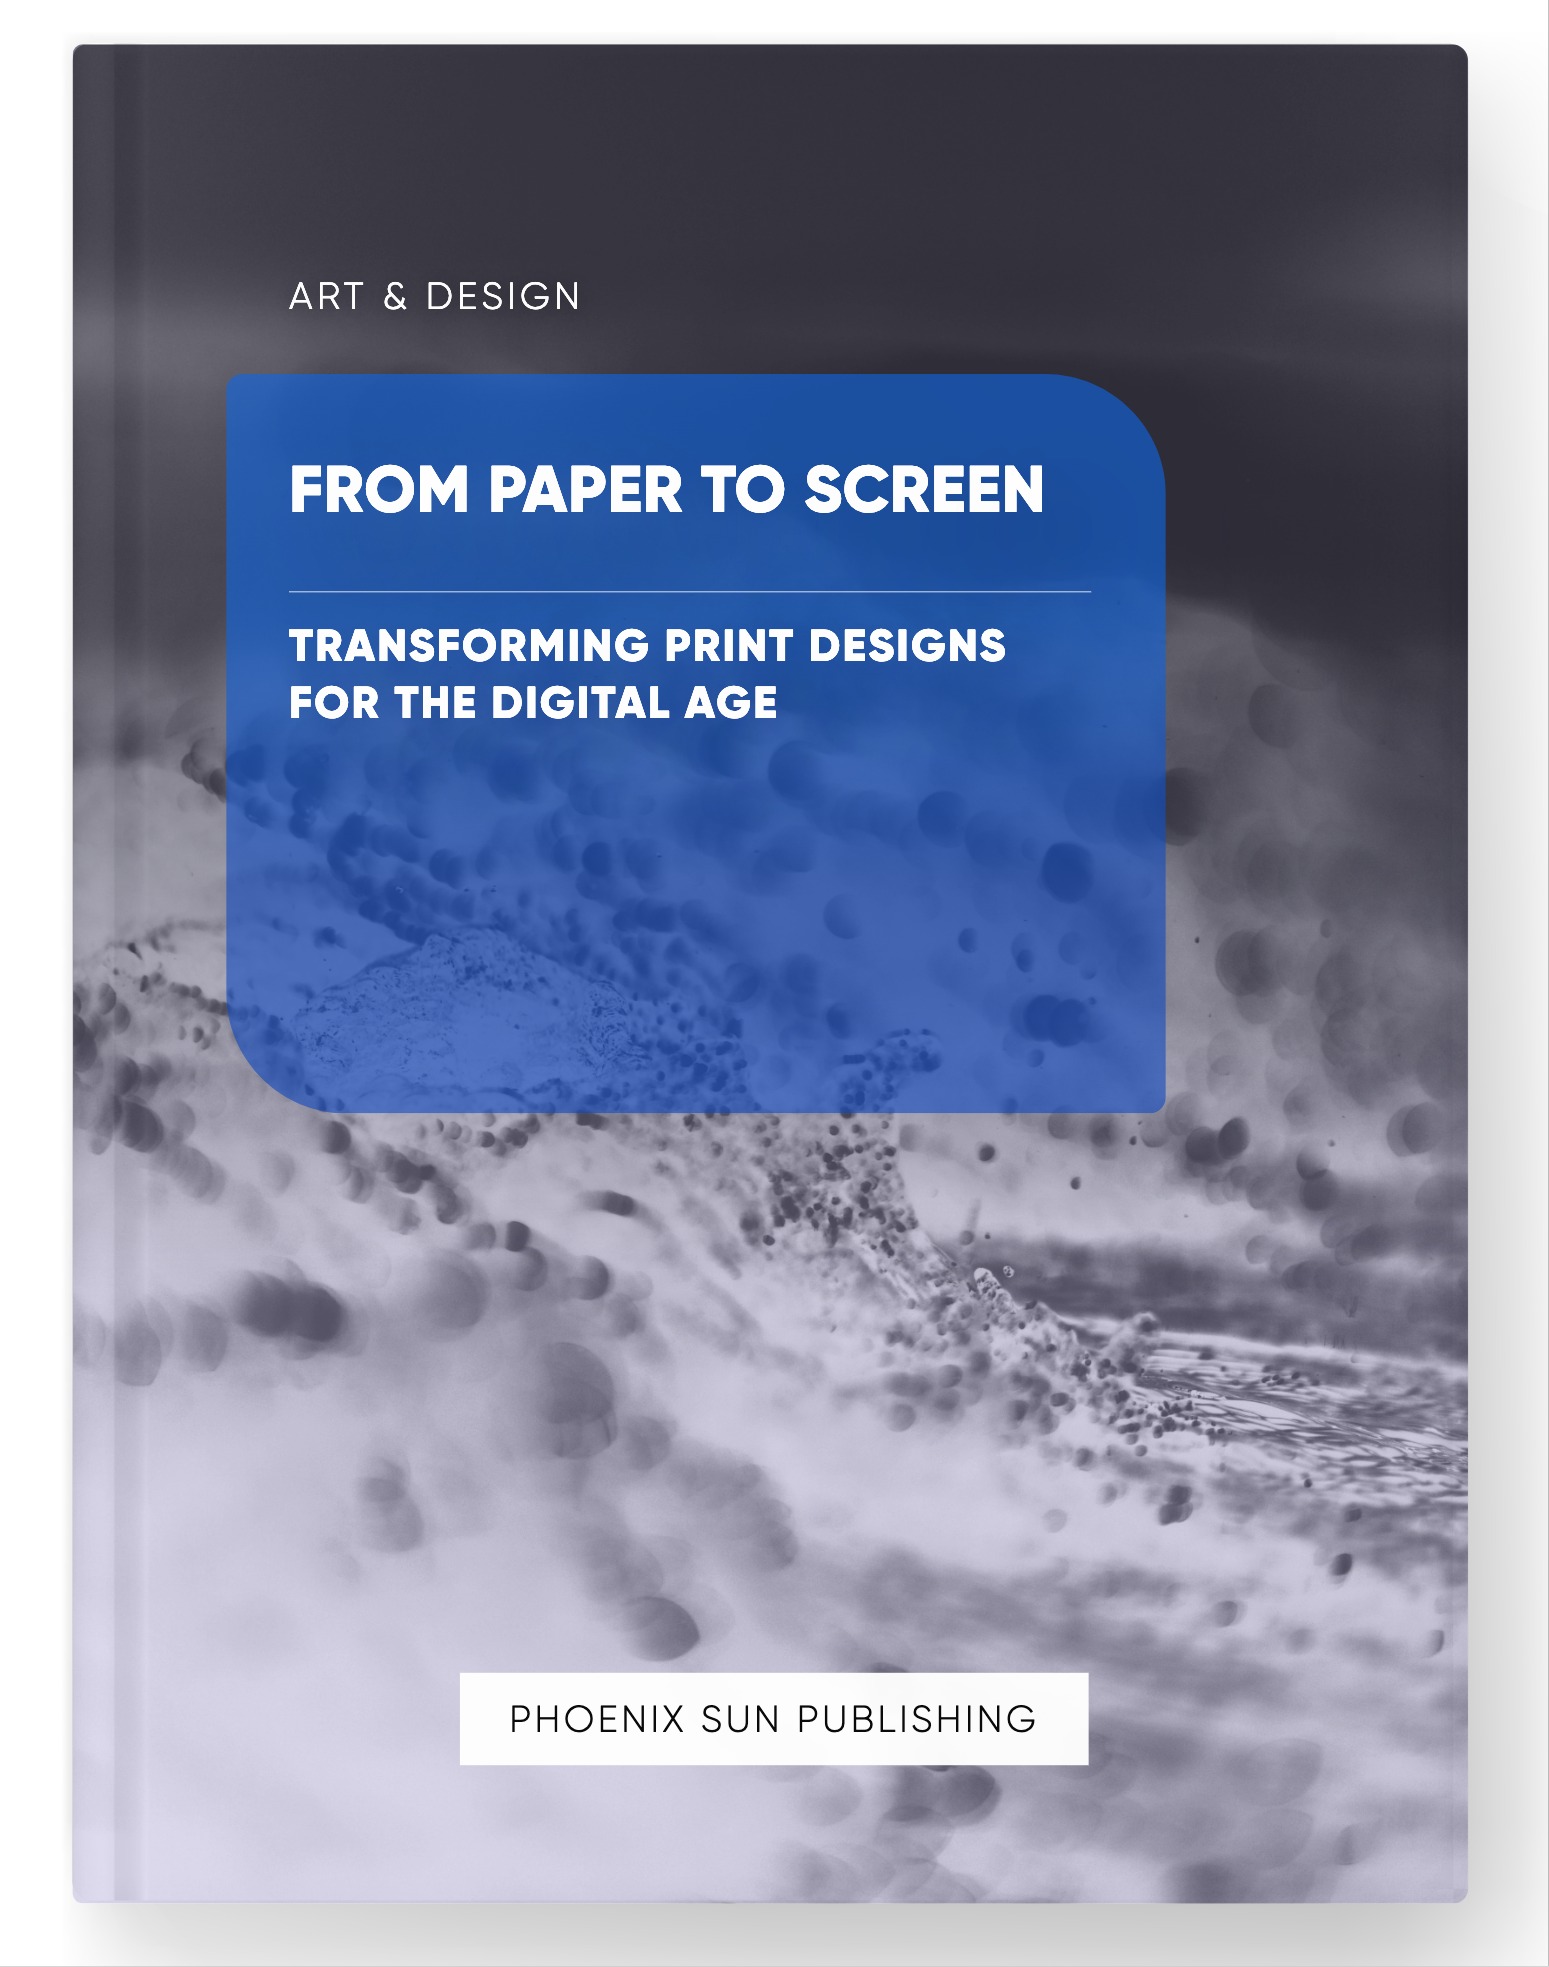 From Paper to Screen – Transforming Print Designs for the Digital Age